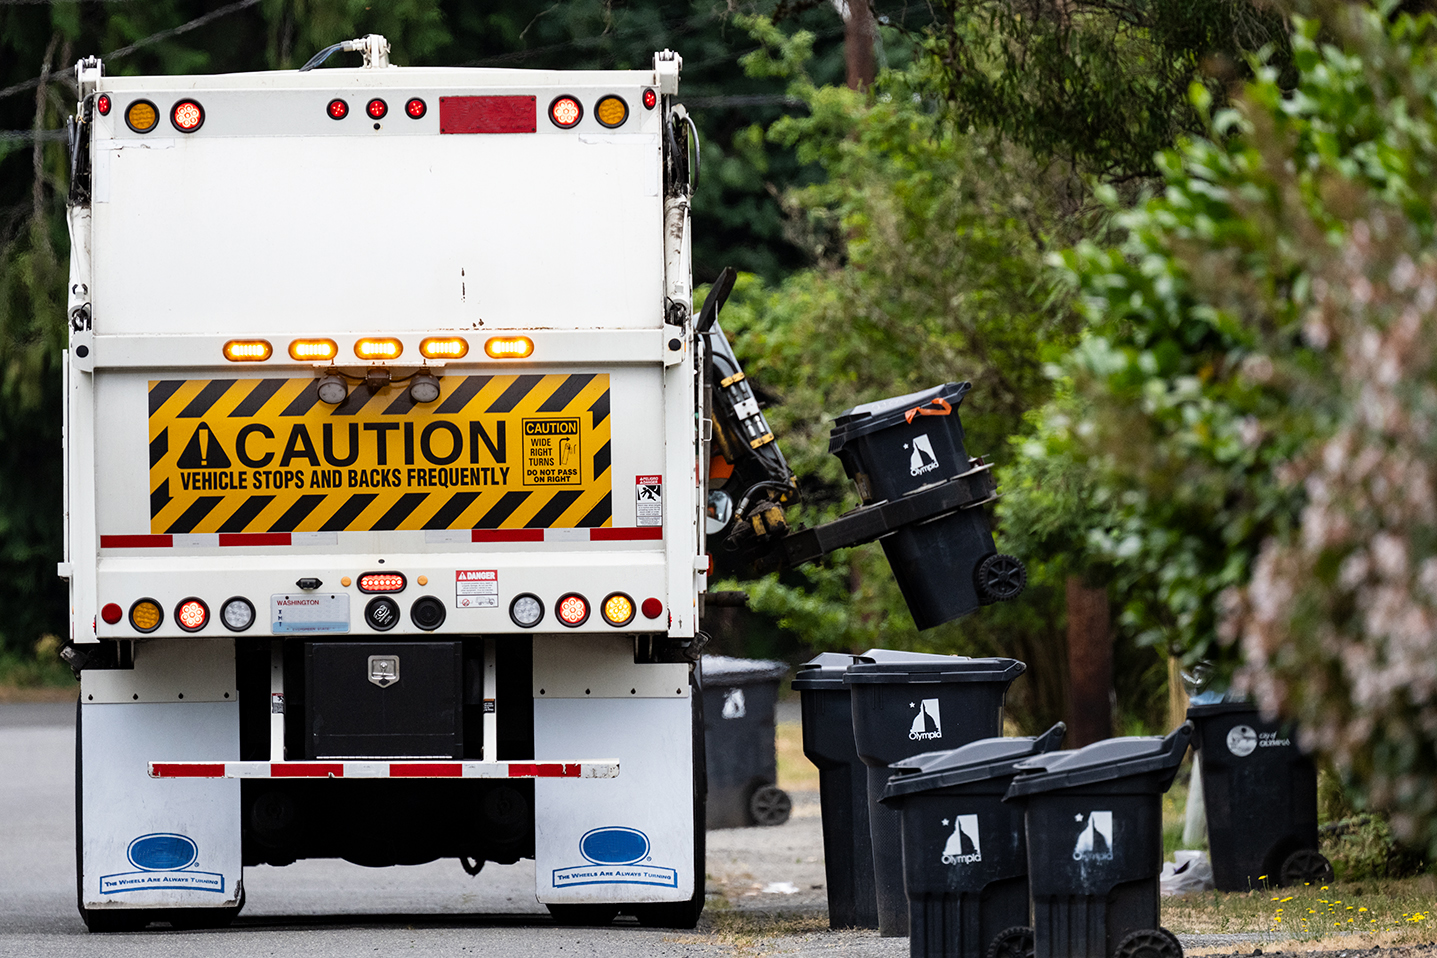 A garbage collection truck picks up and empties a line of residential trash bins.